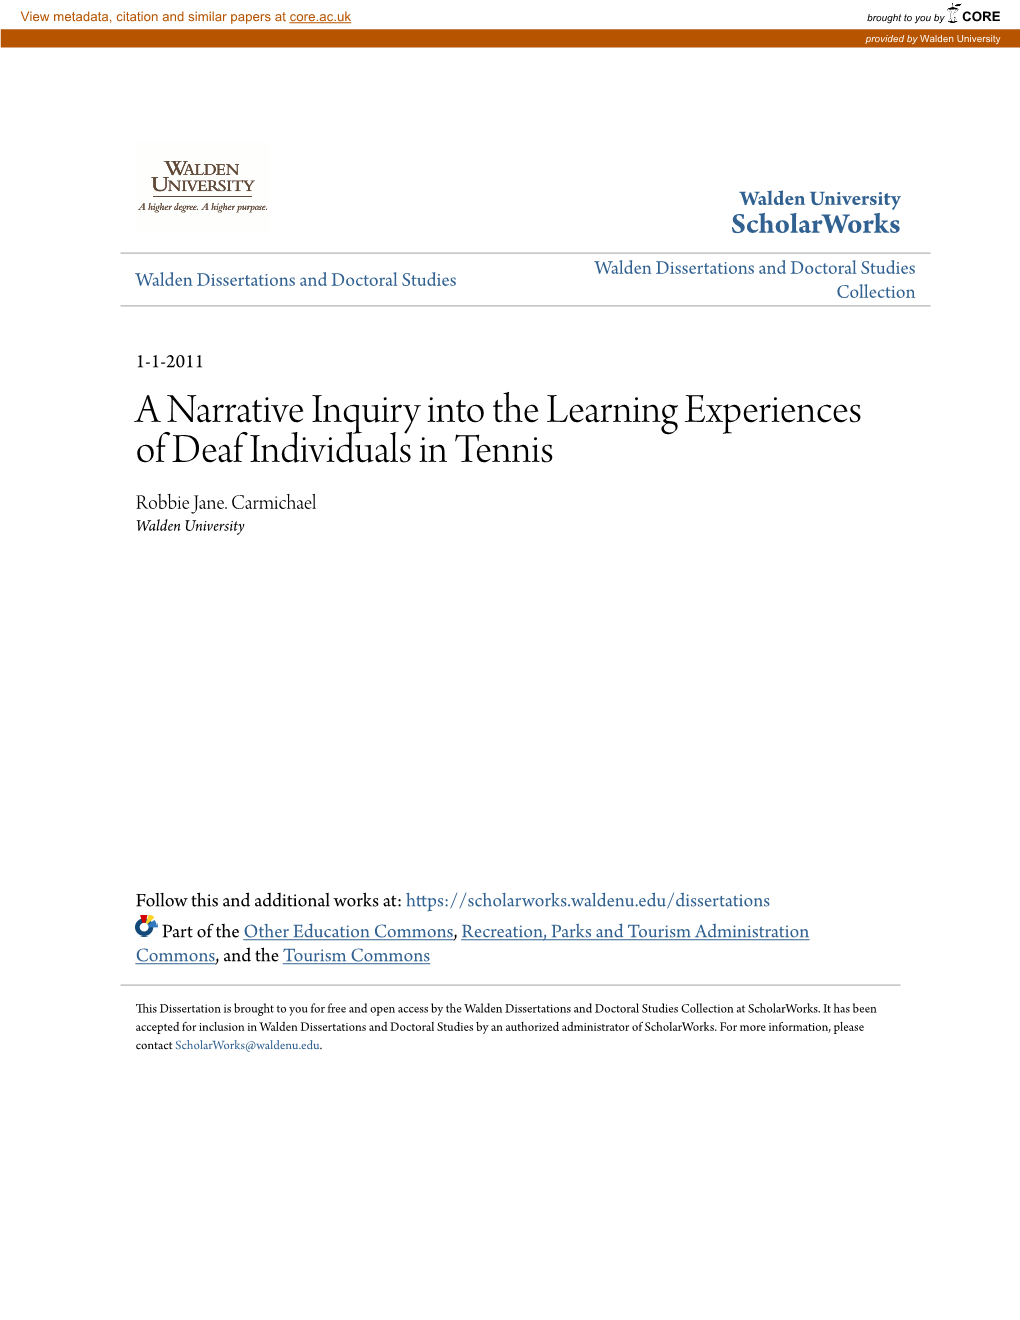 A Narrative Inquiry Into the Learning Experiences of Deaf Individuals in Tennis Robbie Jane